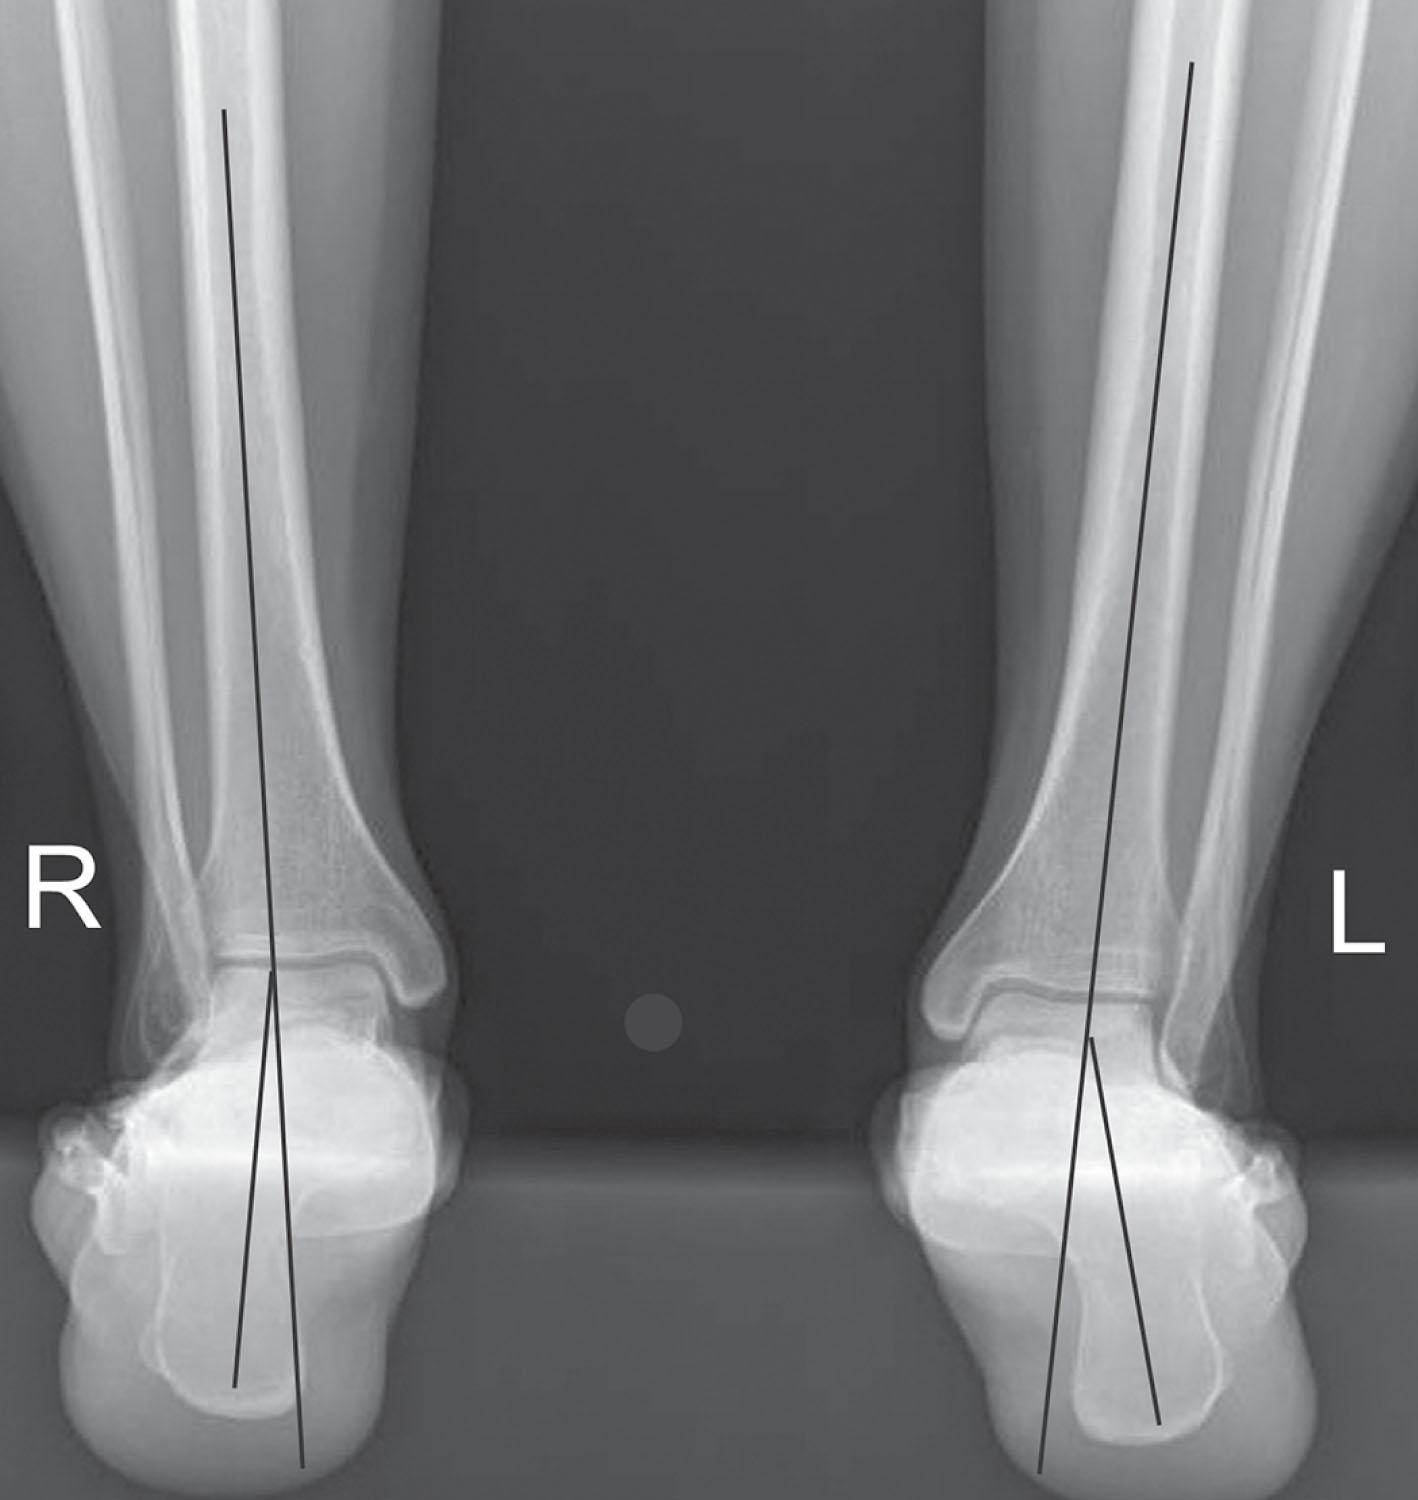 Fig. 29-9, Axial radiograph of the hindfoot alignment view. This radiographic view is useful in determining the magnitude of valgus hindfoot deformity and thus planning the appropriate surgical intervention. The left hindfoot shows increased hindfoot valgus compared with the right.